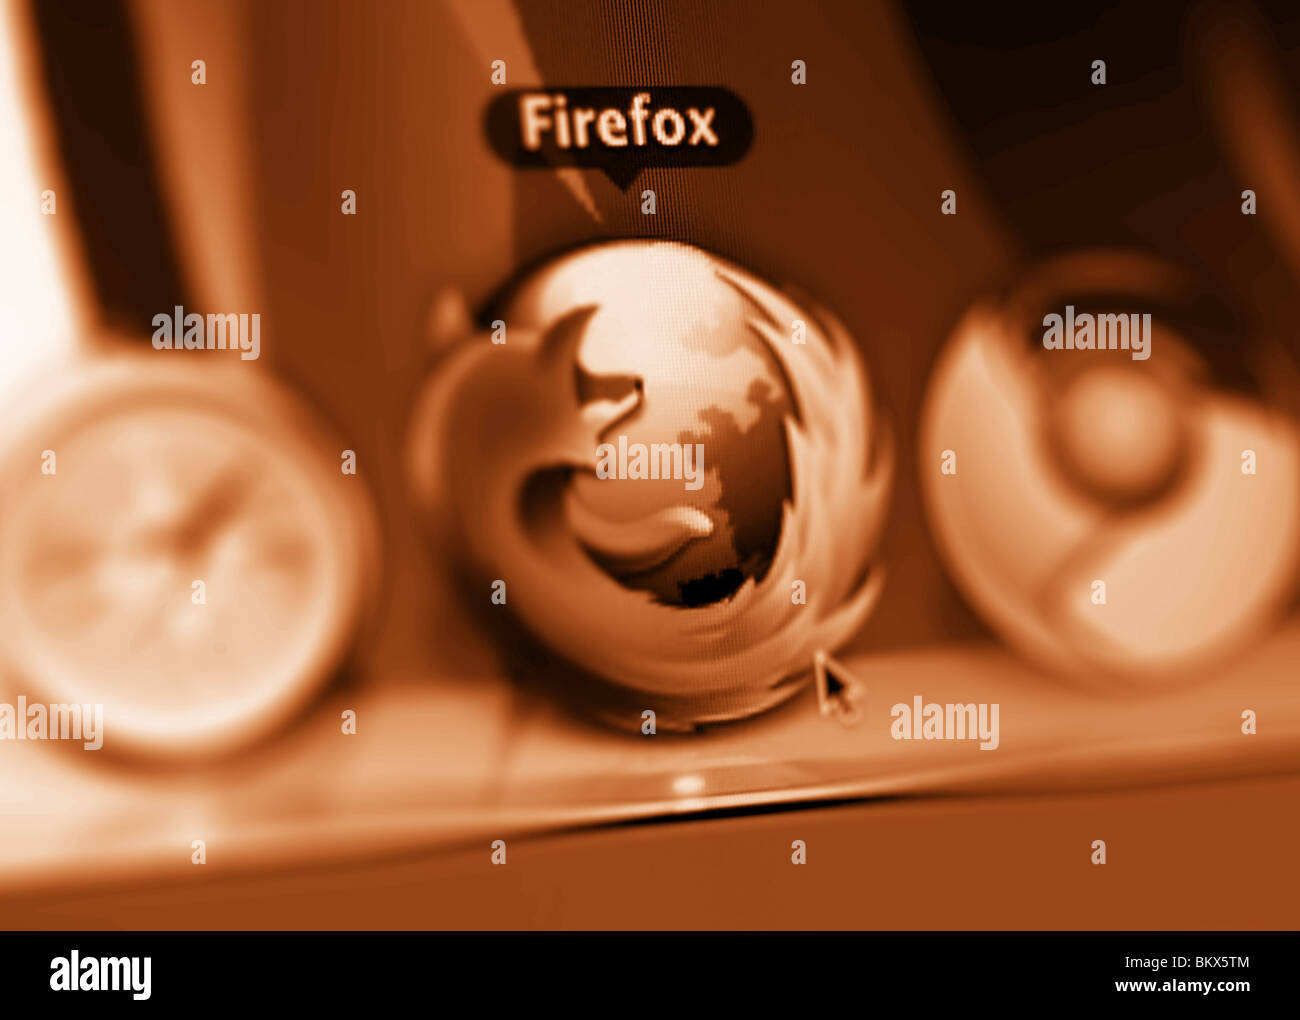 Photo Illustration of the Mozilla FireFox web browser in the dock of a Macbook Stock Photo